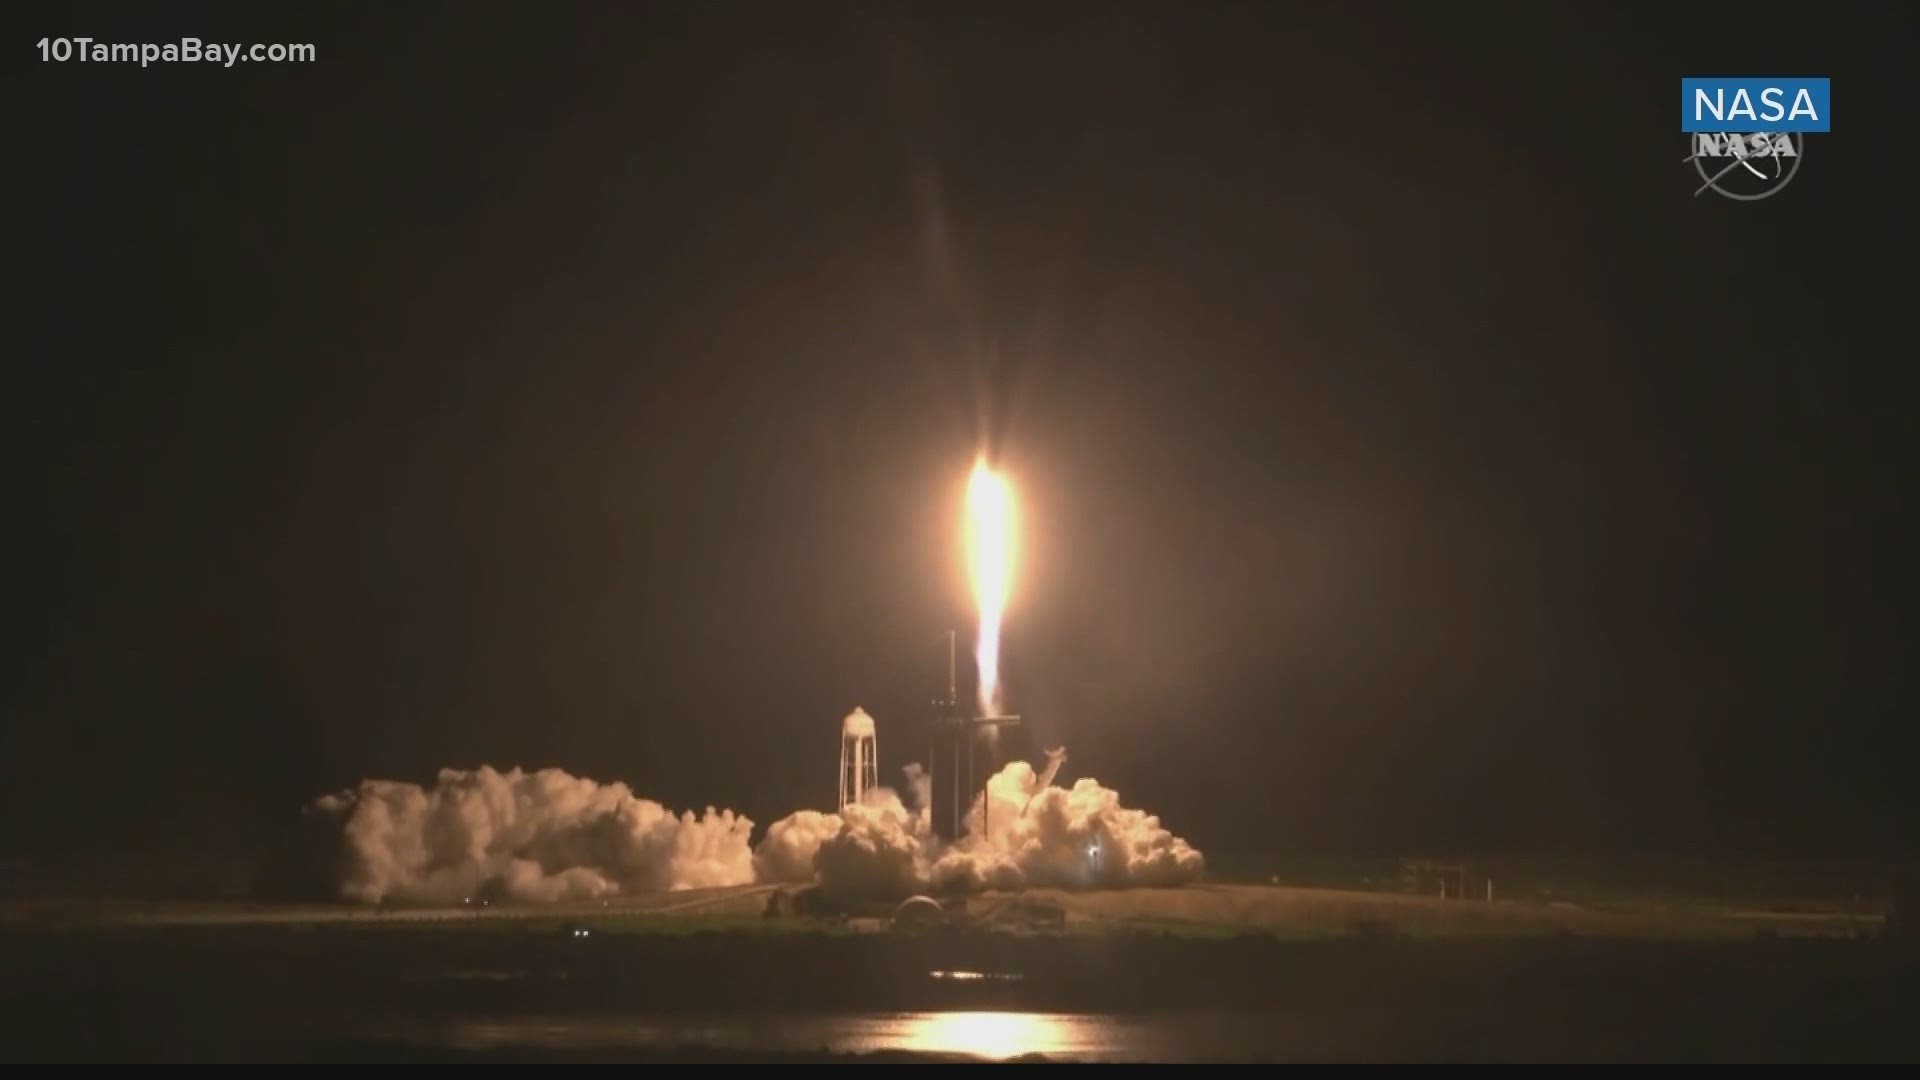 It is the second crewed launch of NASA astronauts aboard SpaceX's Dragon capsule.